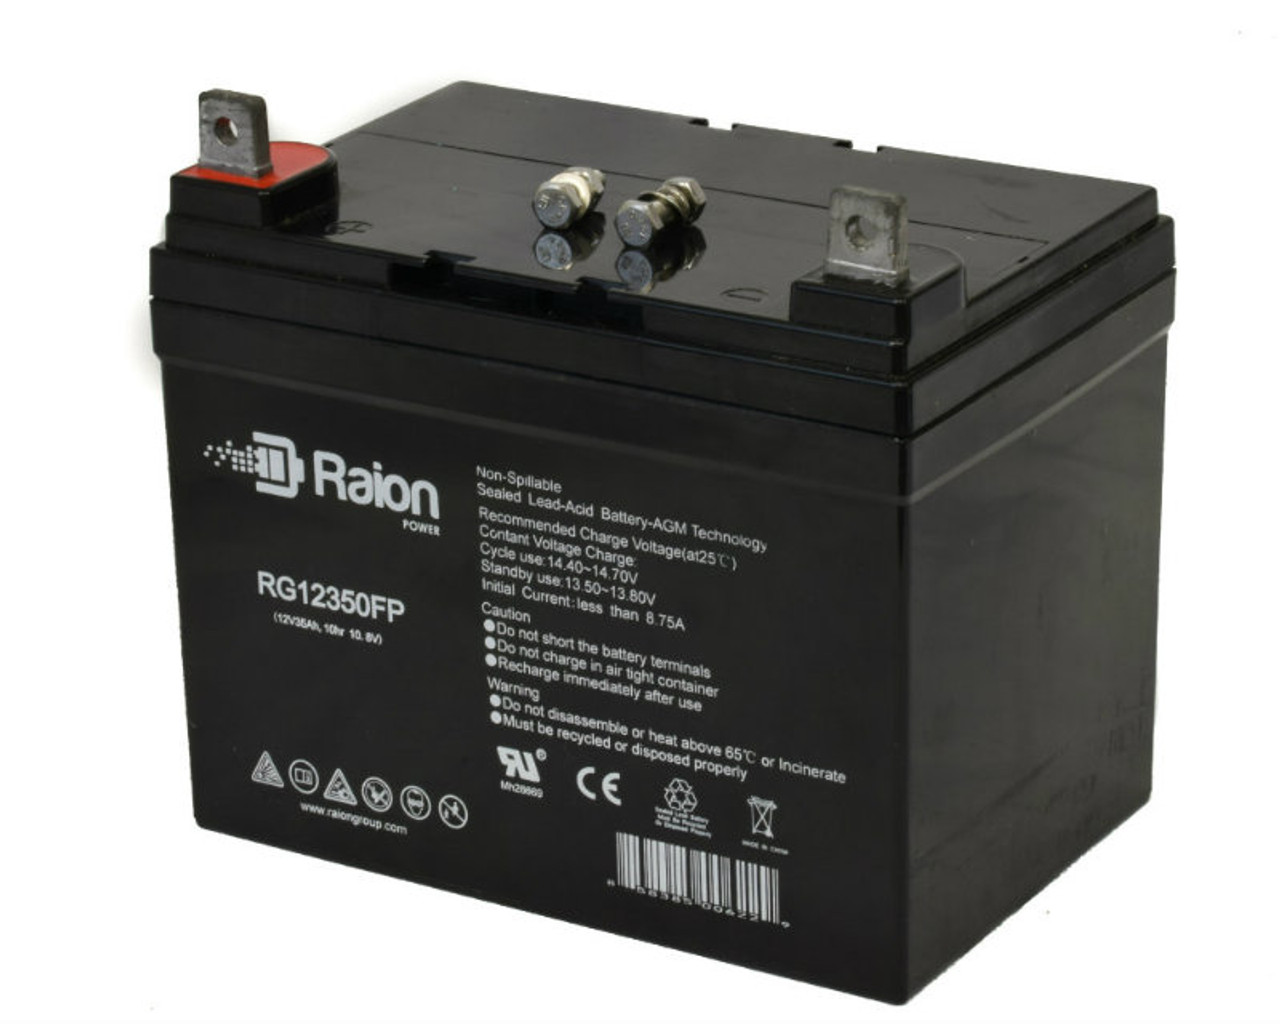 Raion Power Replacement 12V 35Ah RG12350FP Mobility Scooter Battery for Everest & Jennings 14 Inch Growing 3P/3W